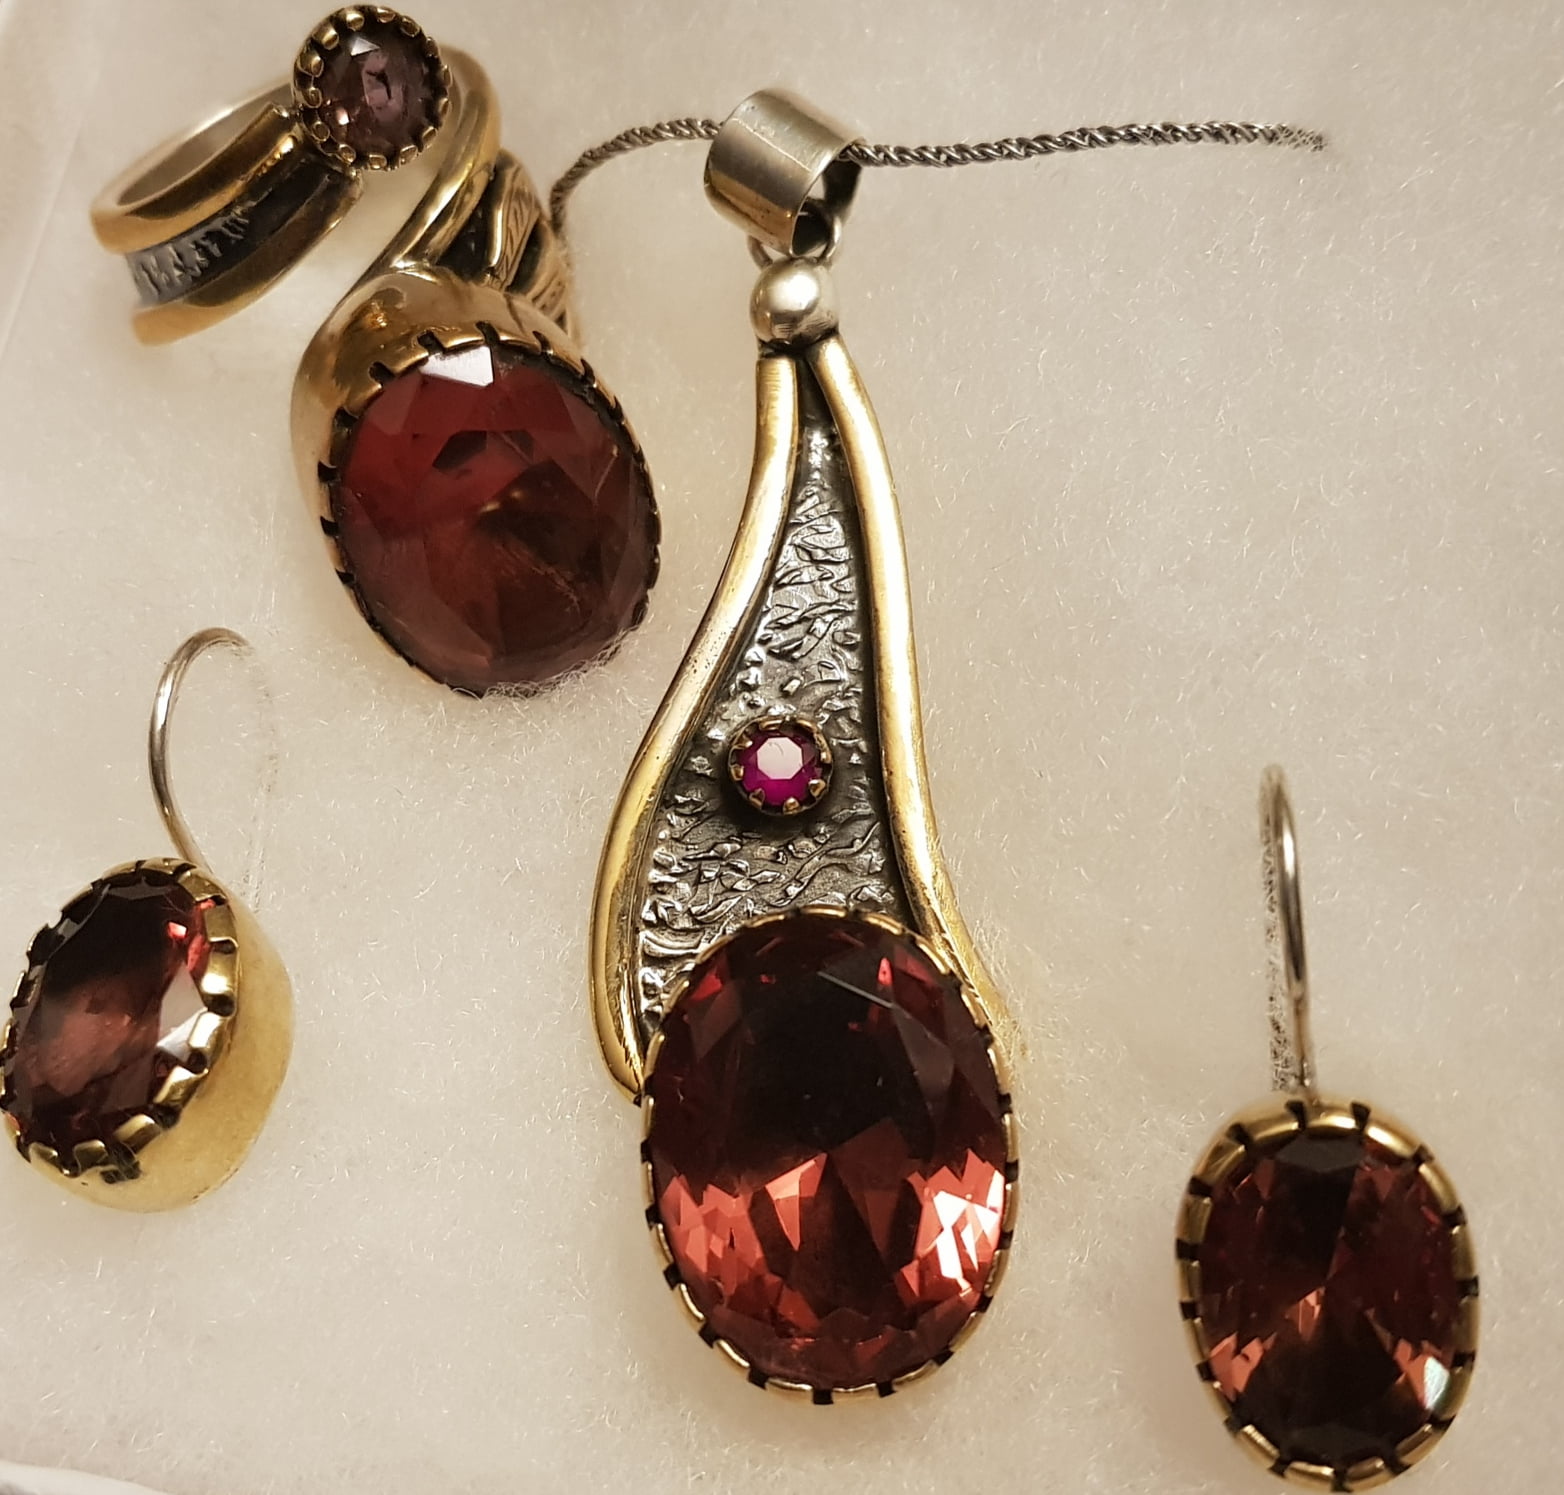 Suspension earrings and pendants with red gemstone fragments 925 silver